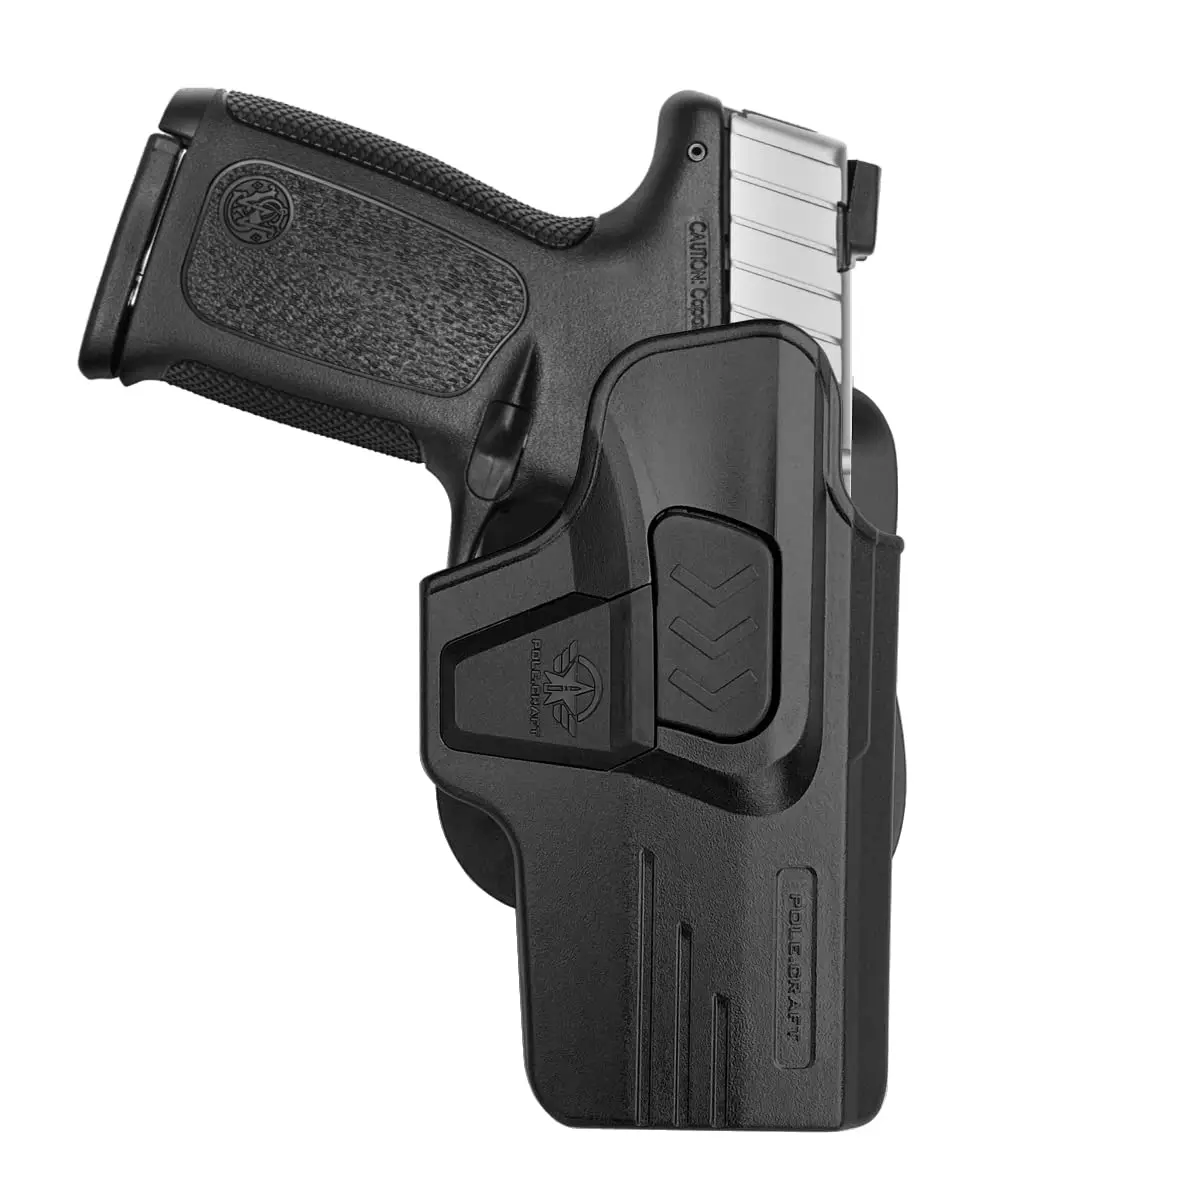 

OWB Paddle Polymer Holsters Fit: Smith & Wesson SD9 VE / SD40 VE Pistol, Outside Waistband Open Polymer Holster with Safety Lock